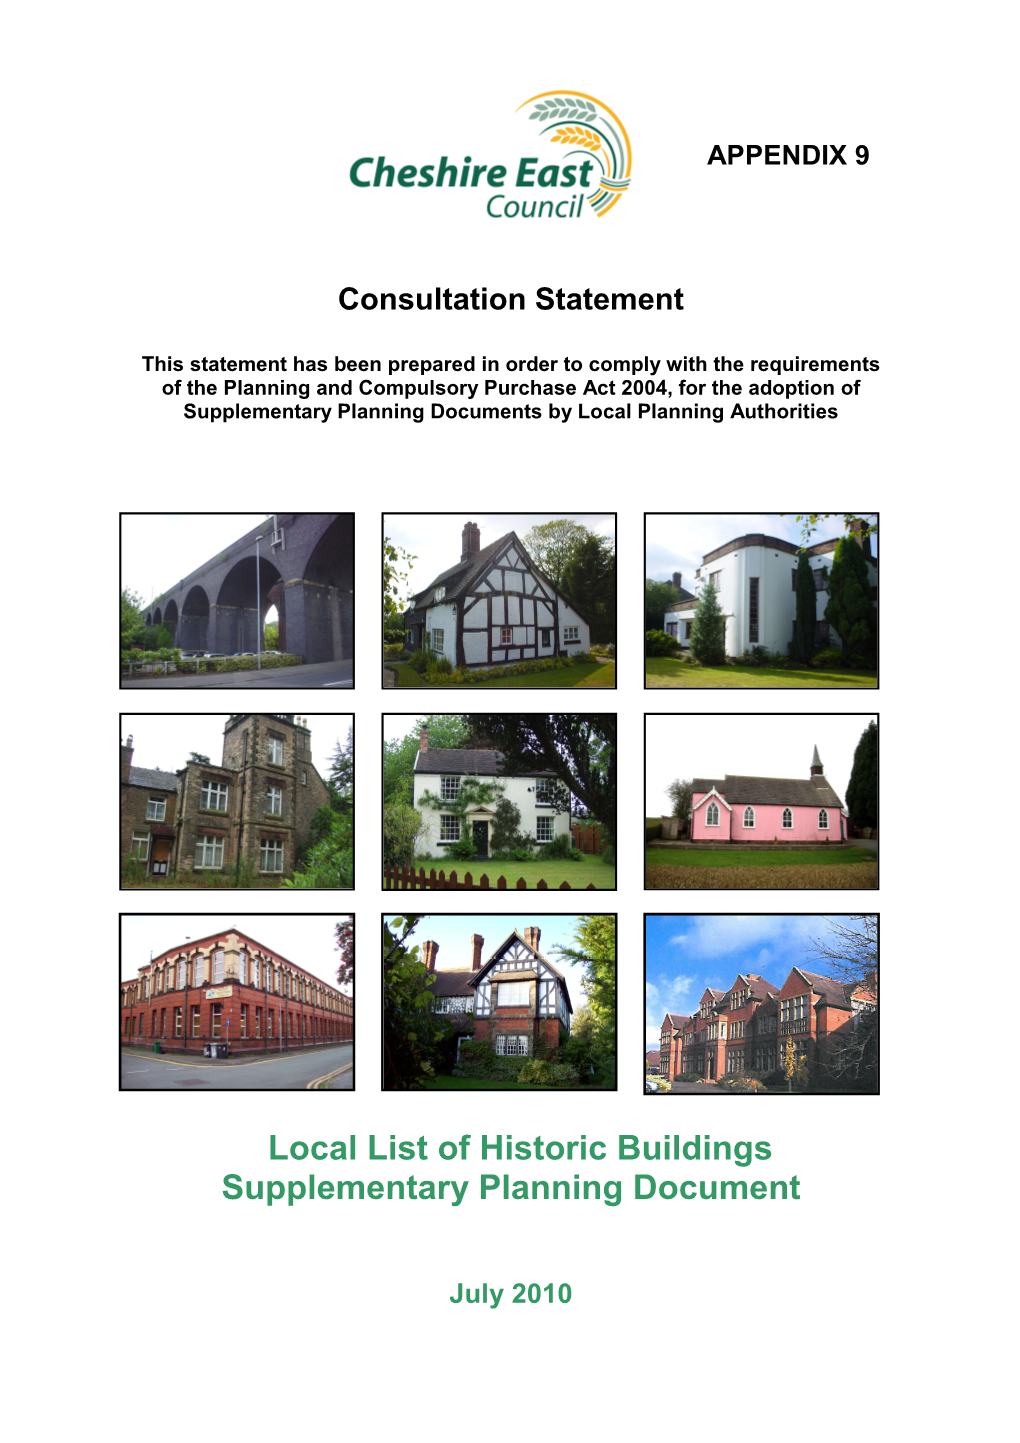 Local List of Historic Buildings Supplementary Planning Document